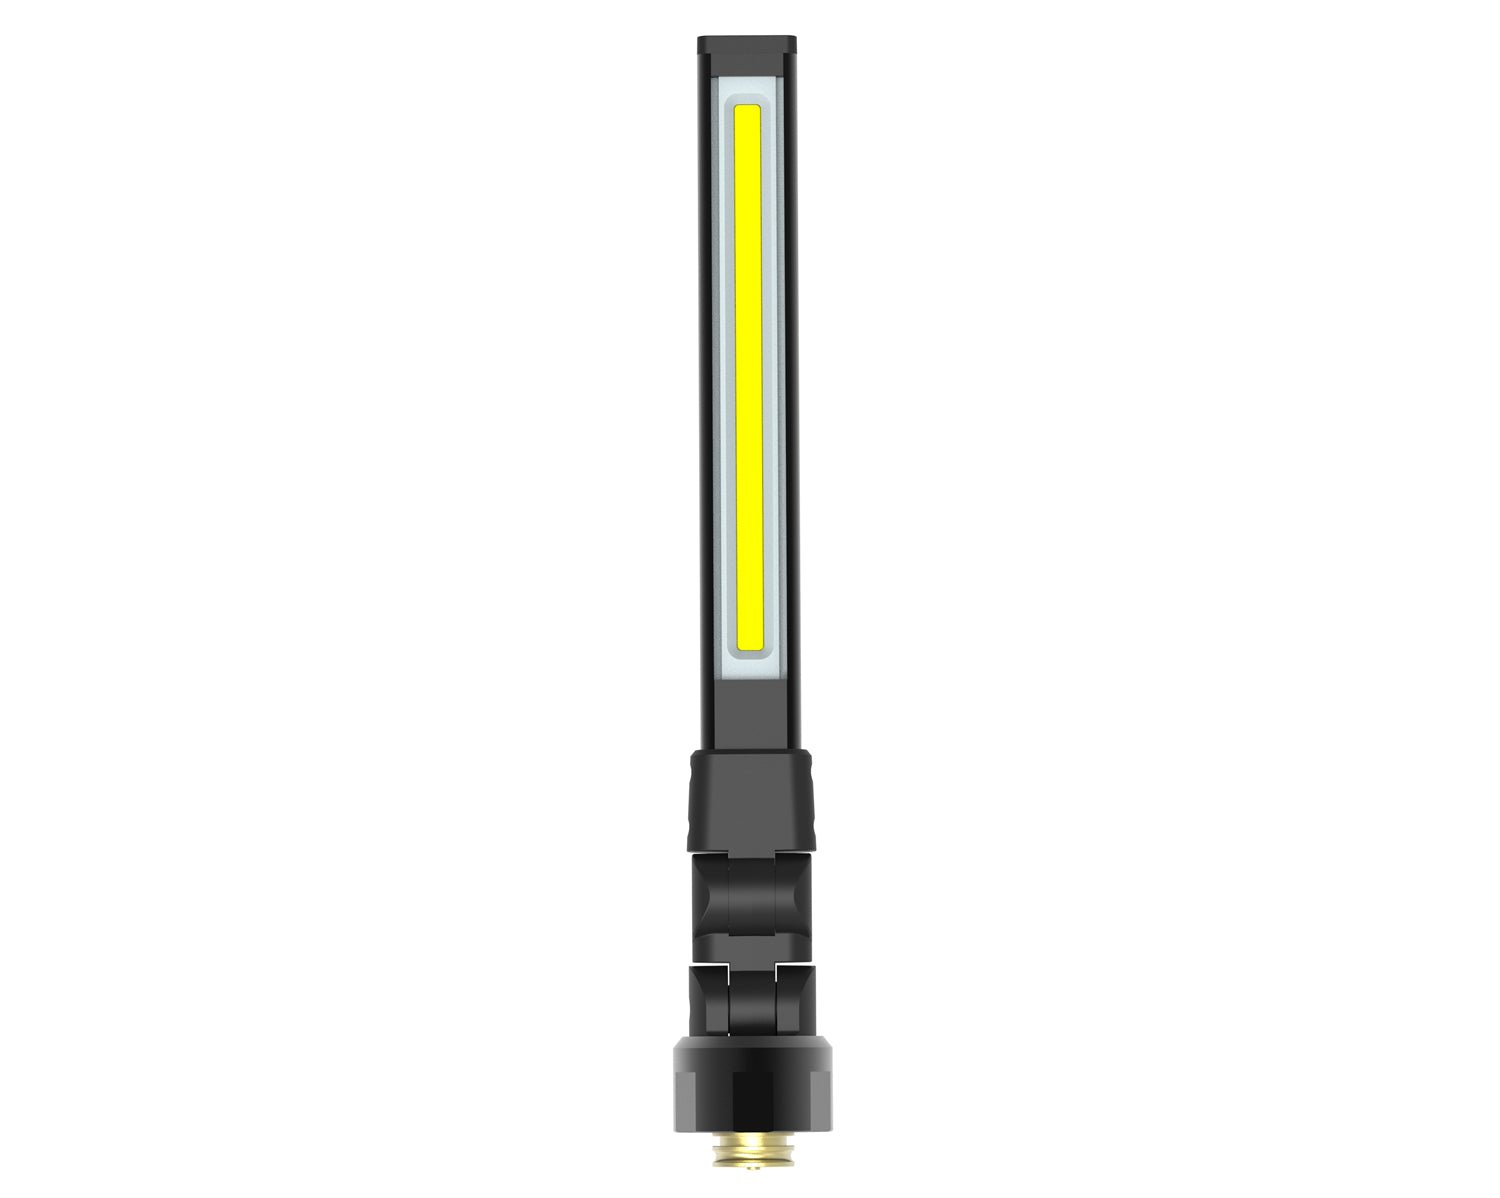 All in one high bright COB quick connect work light - LaySun Smart